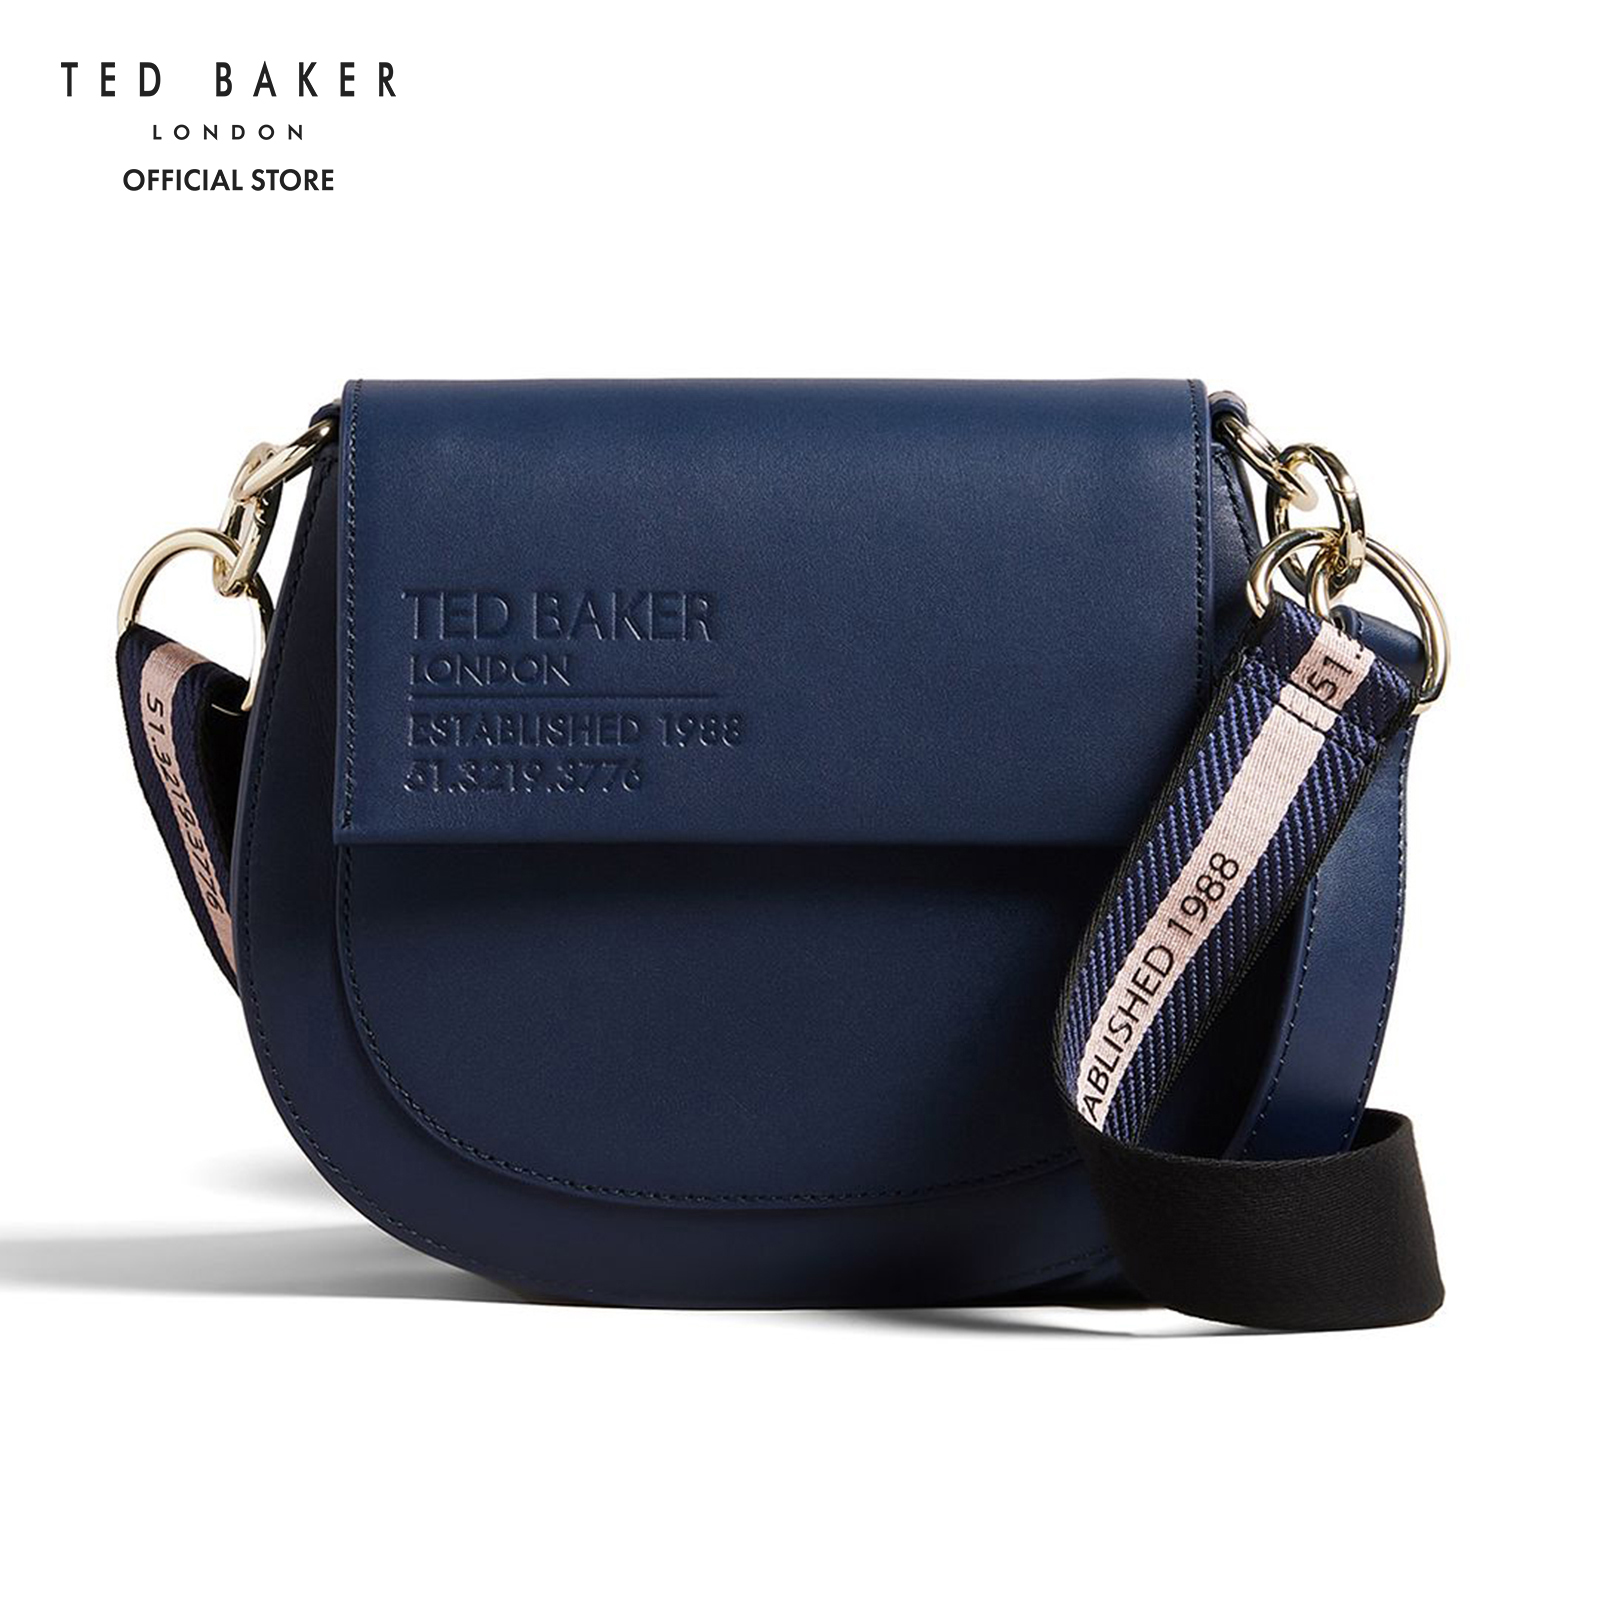 Ted Baker Darcell Black Leather Crossbody bag TB258599B - Bags